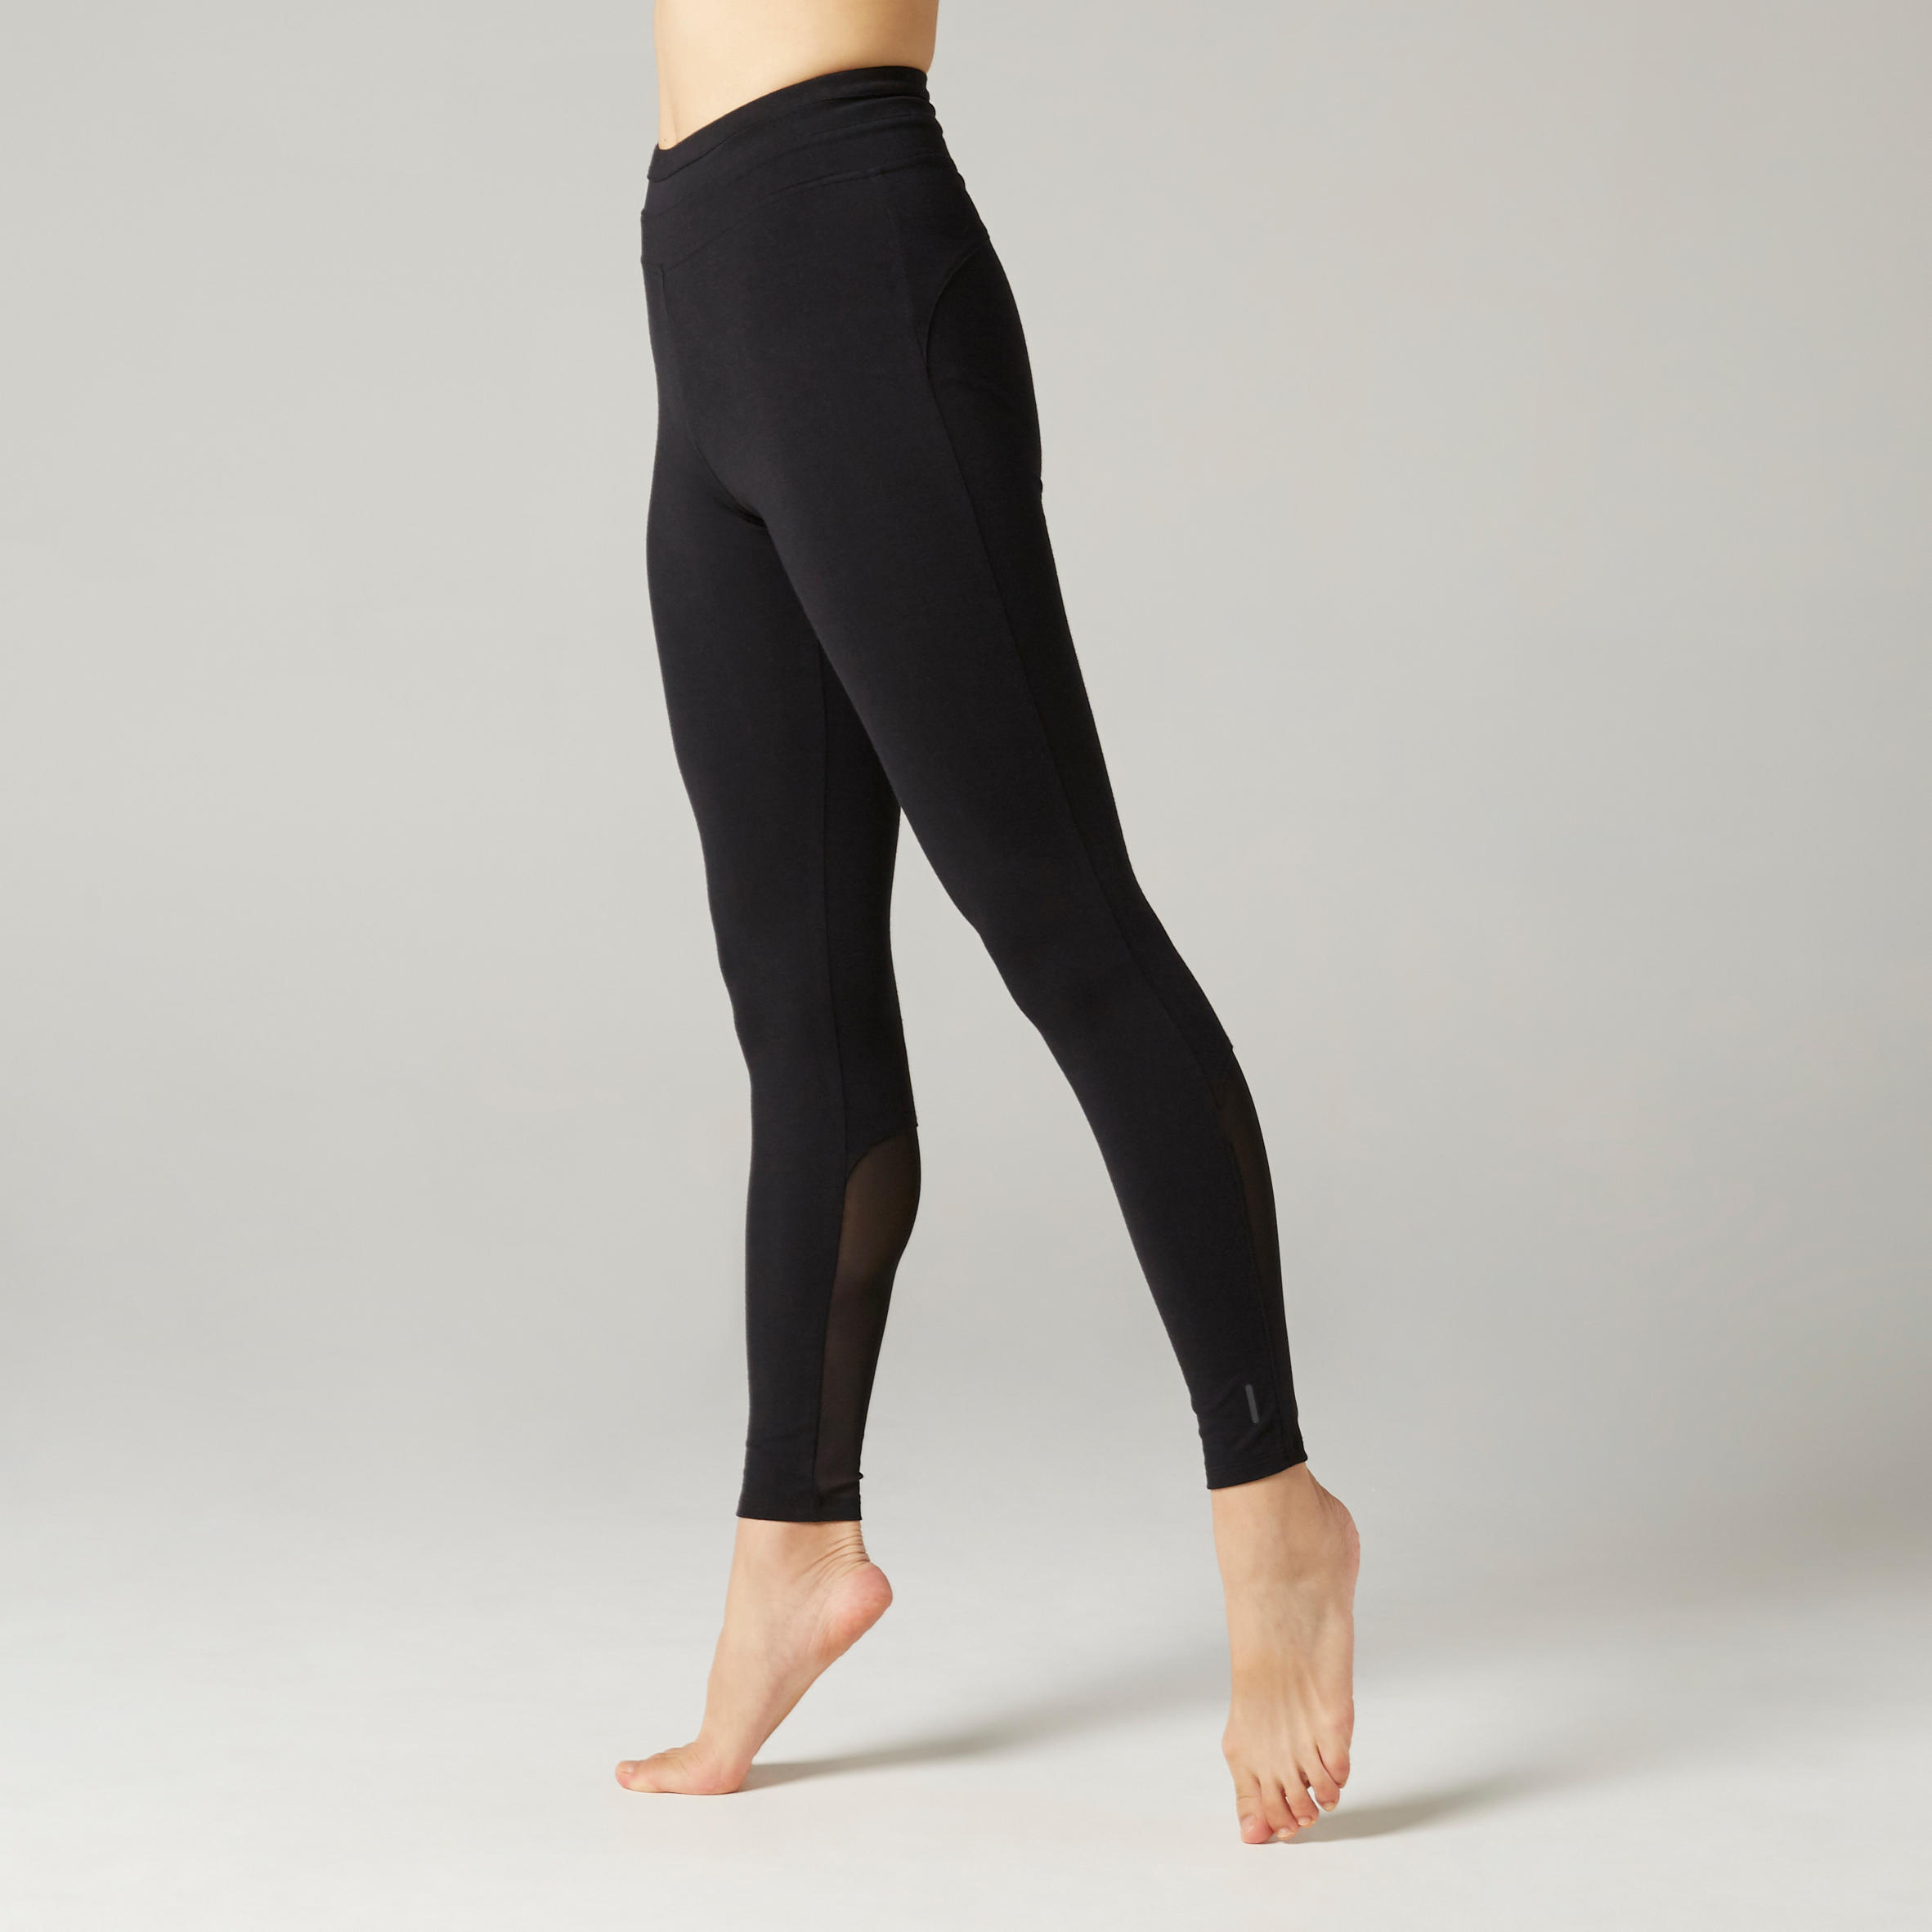 Stretchy High-Waisted Cotton Fitness Leggings with Mesh - Brown